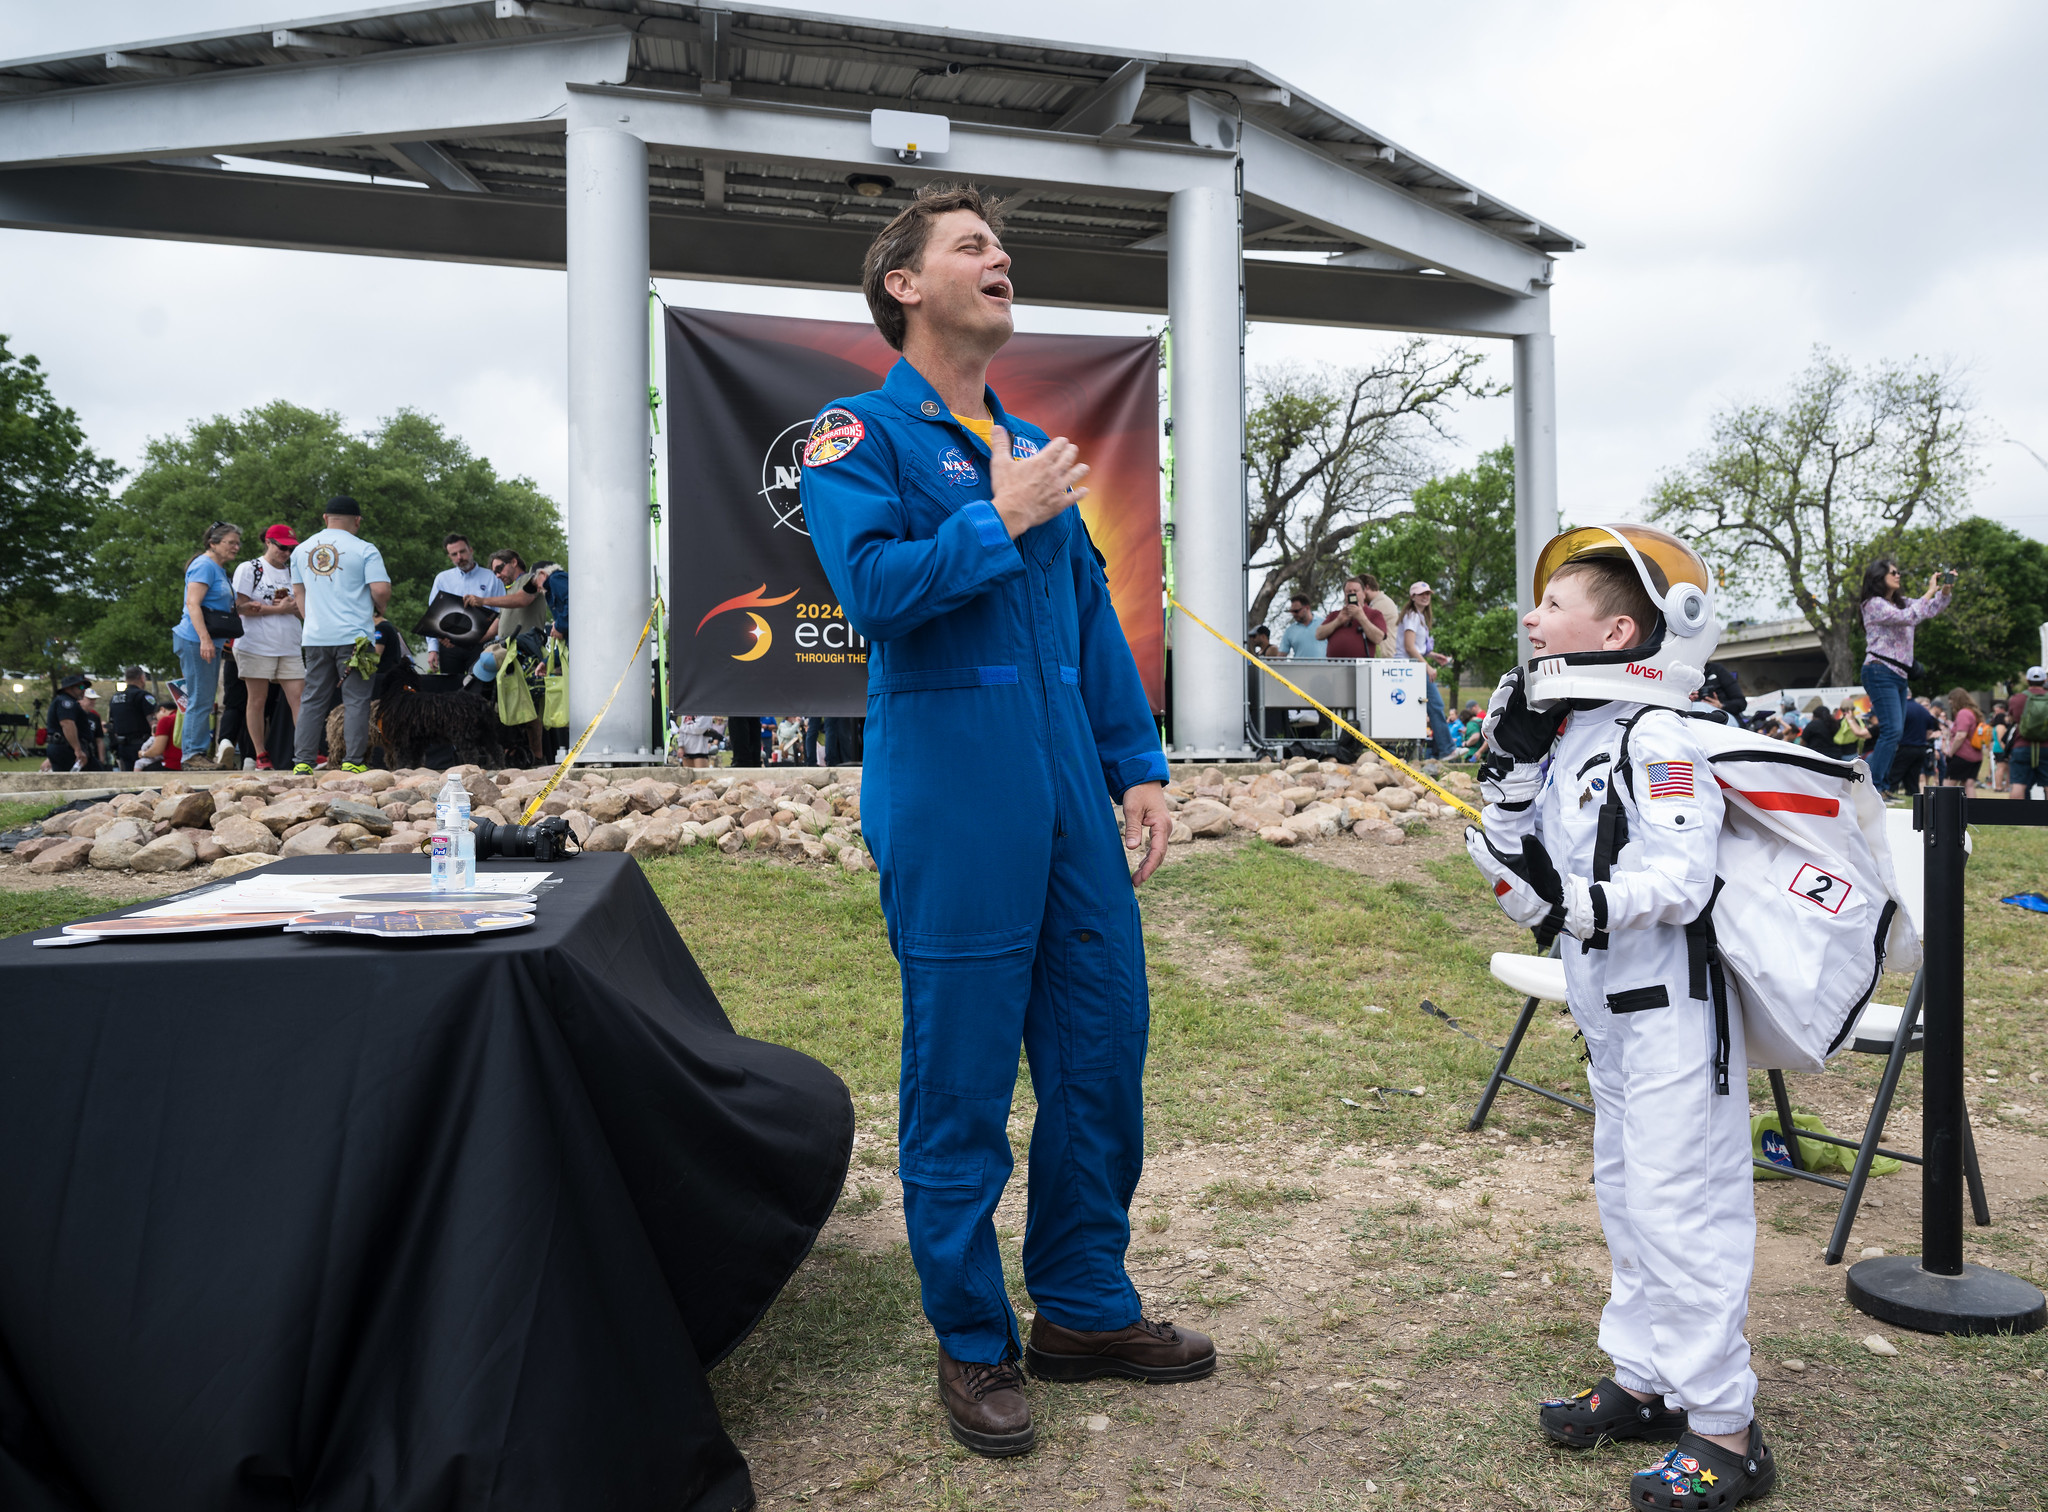 A man in a blue astronaut jumpsuit stands on grass next to a young child wearing an astronaut costume. They are outdoors, near a table with eclipse-themed photo props. Behind them, people stand under a white pavilion. There is a large banner on the pavilion that says "2024 eclipse."